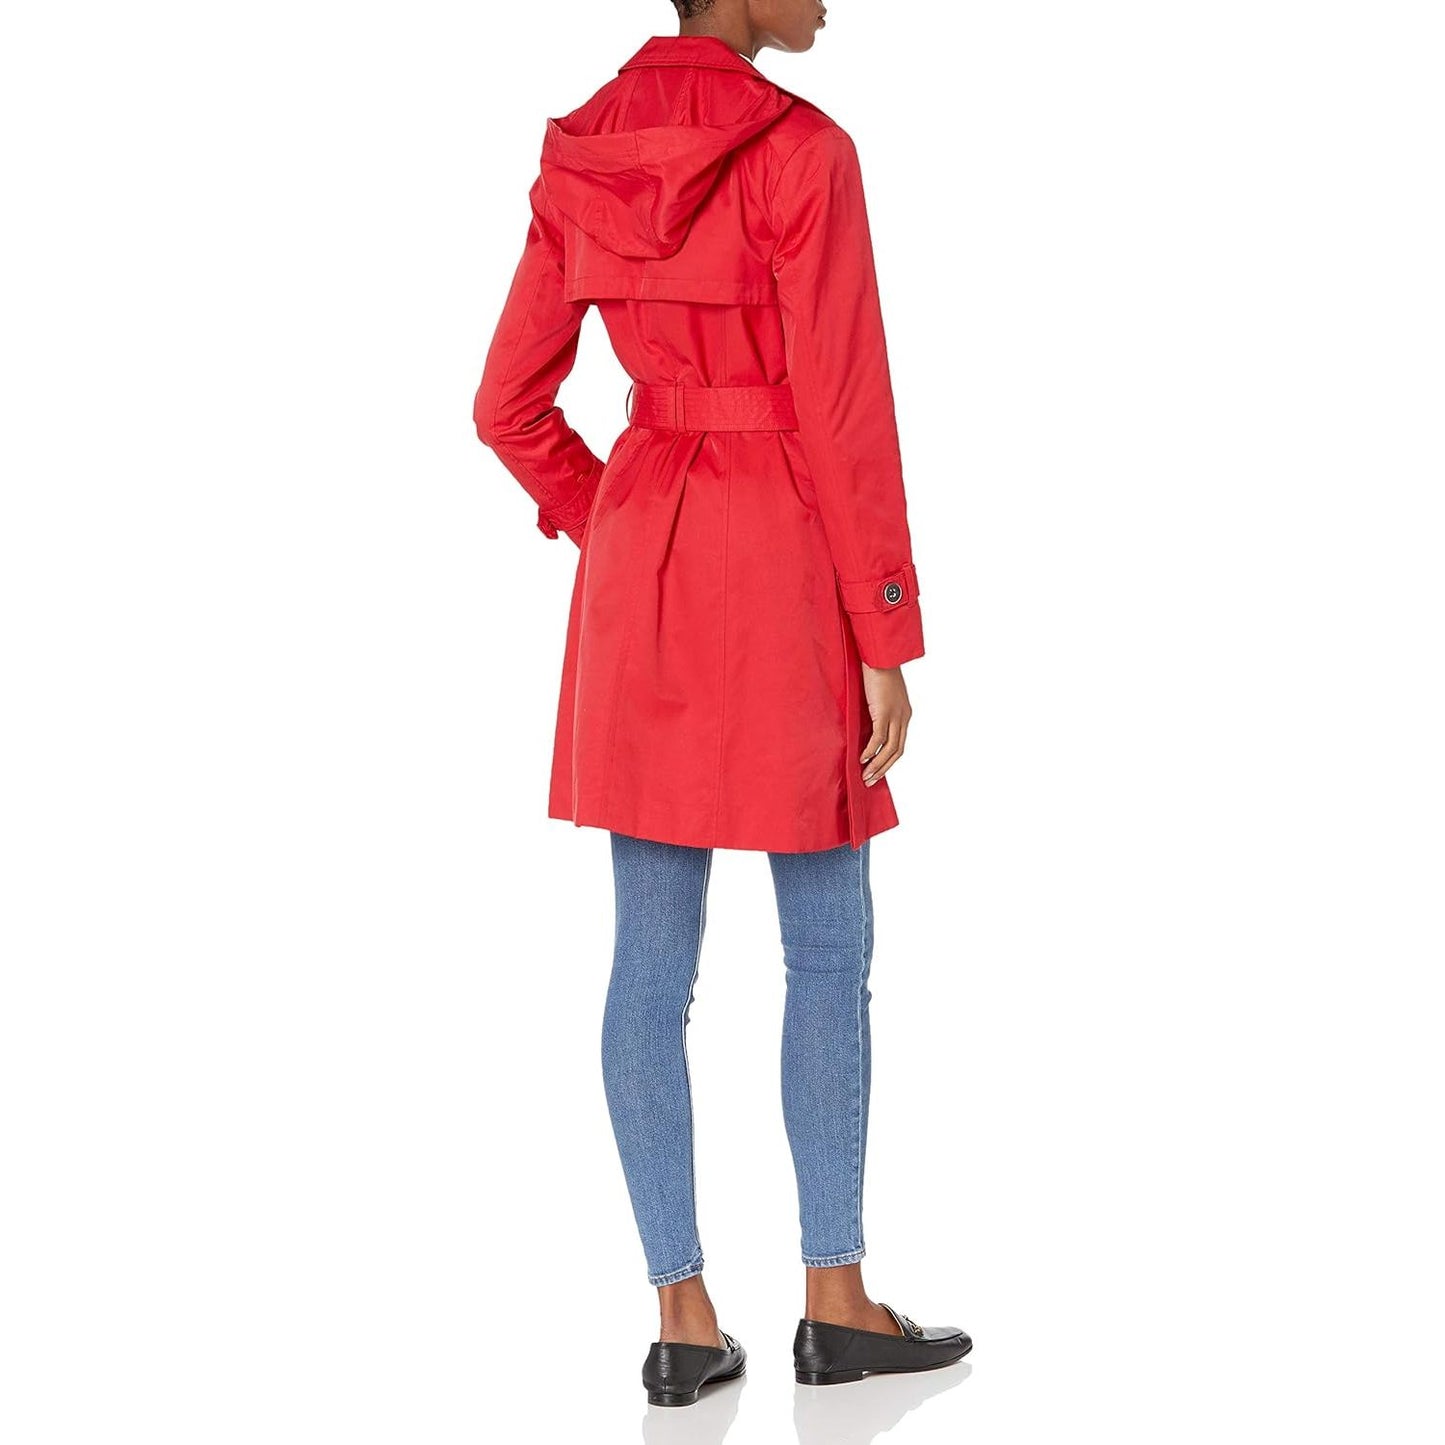 Cole Haan womens Double Breasted Trench Coat for Spring